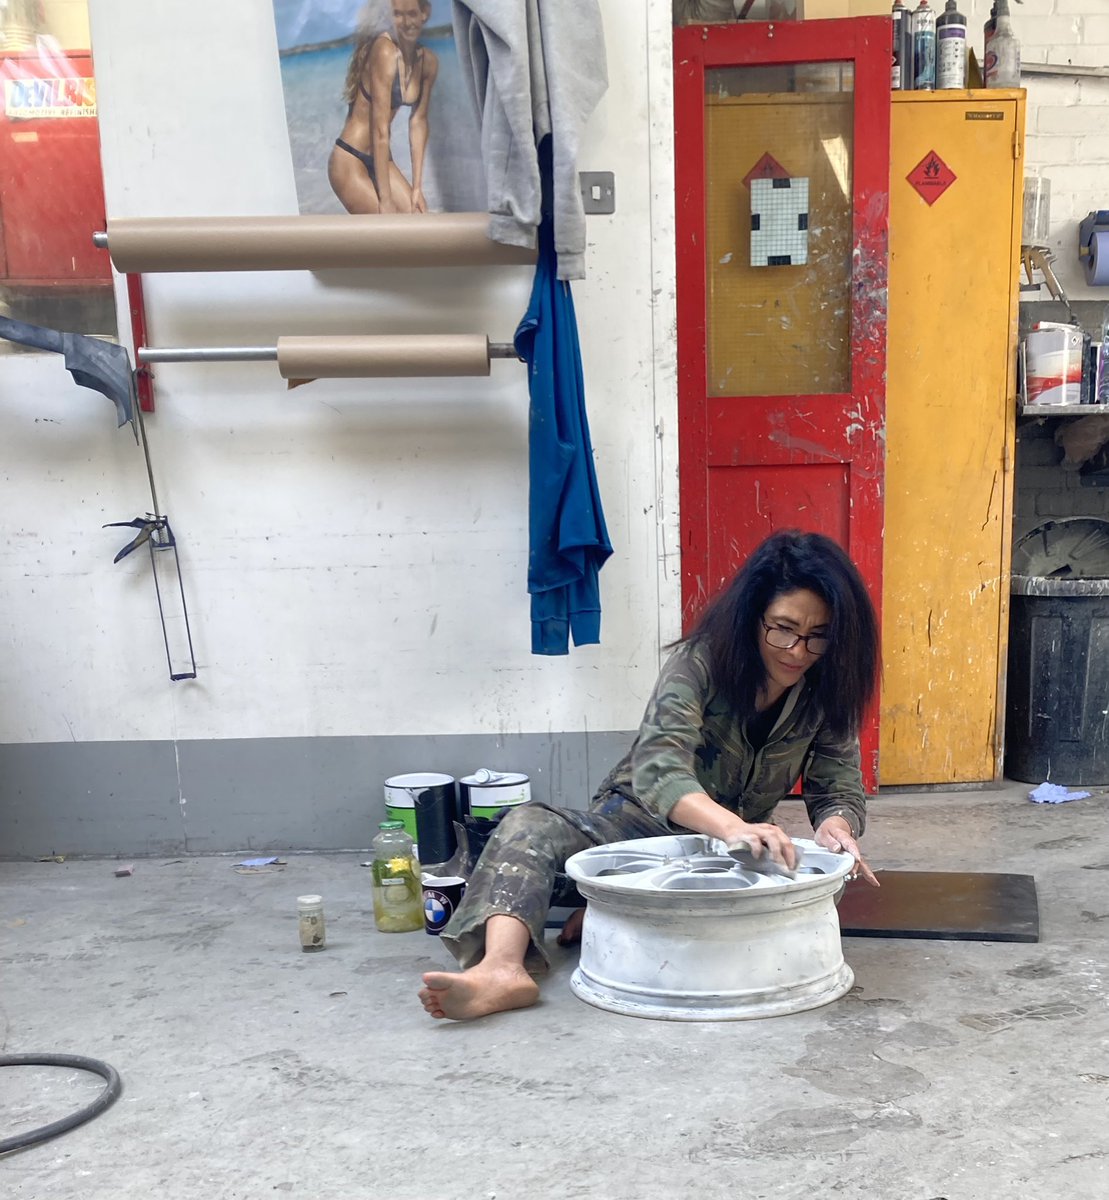 Thank you Martin @mt.craftsman helping me to prepare and finish the sculpture. #brooklyn #newyork #PassionForFreedom #exhibition #yemeni #artist @p4freedom